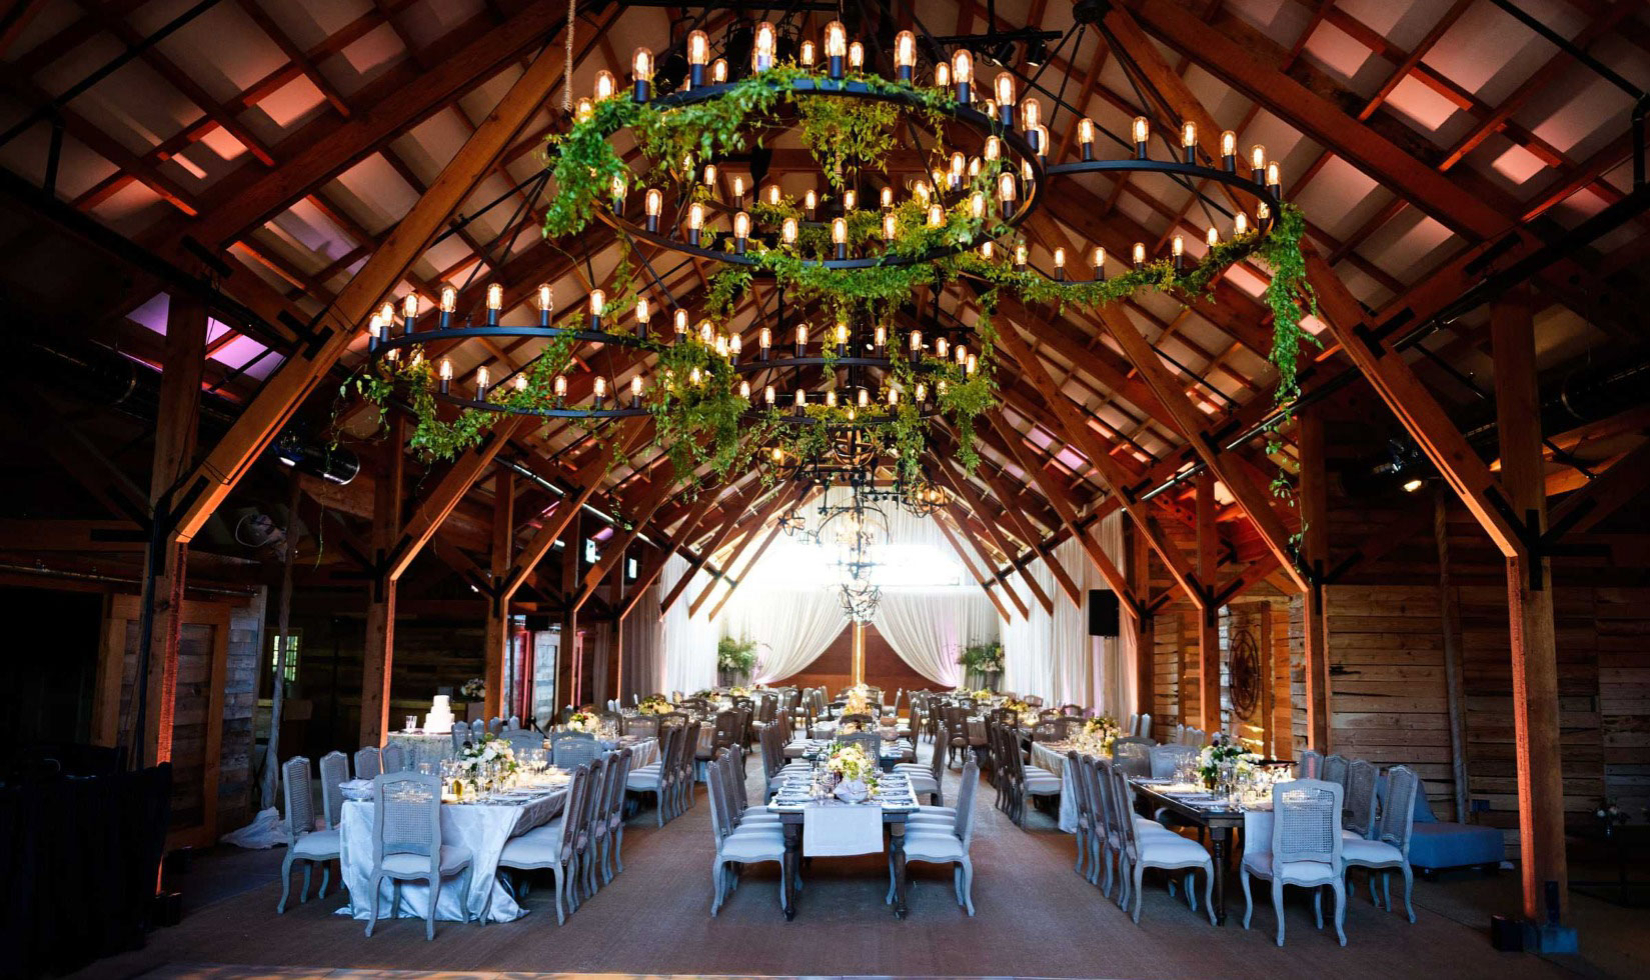 Dining room at winery with chandeliers and wooden beam across vaulted ceiling 